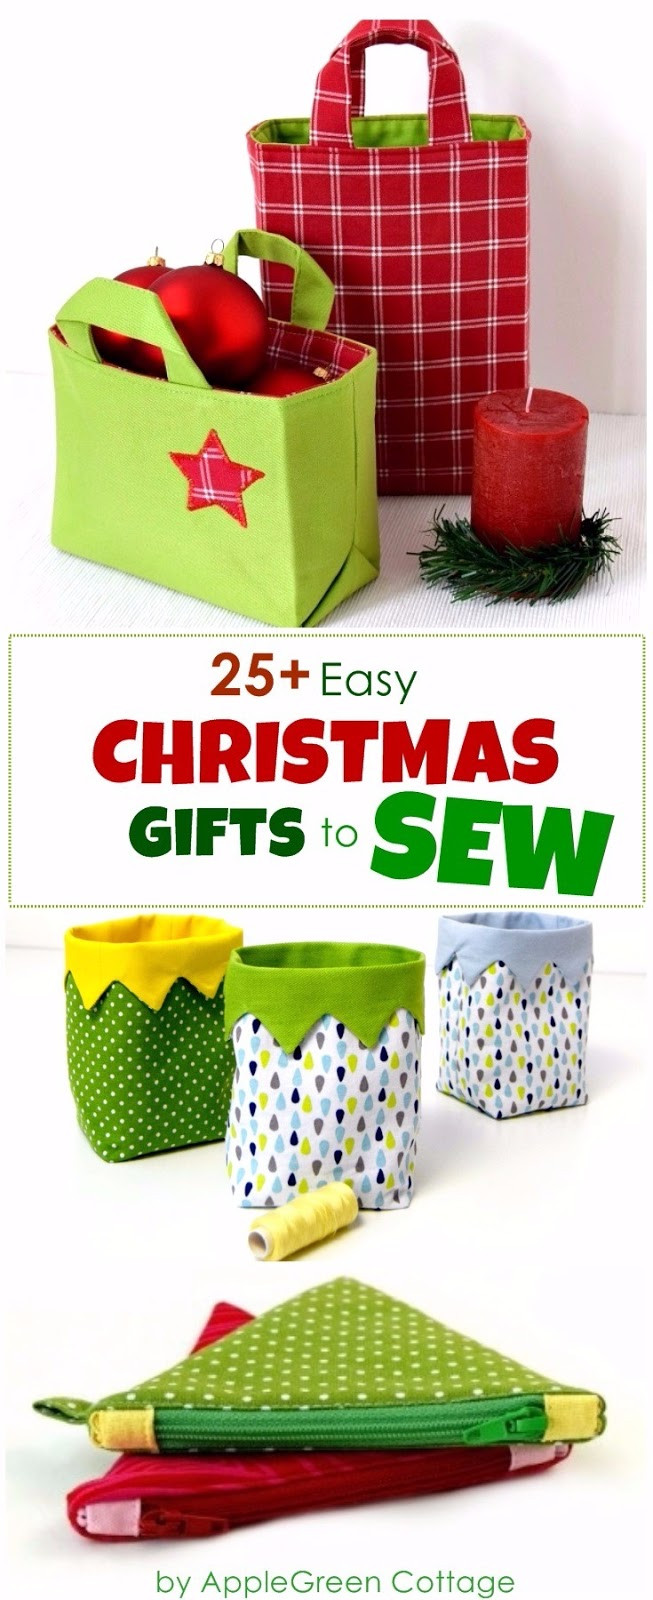 DIY Sew Gifts
 25 diy Christmas Gifts To Sew With Patterns